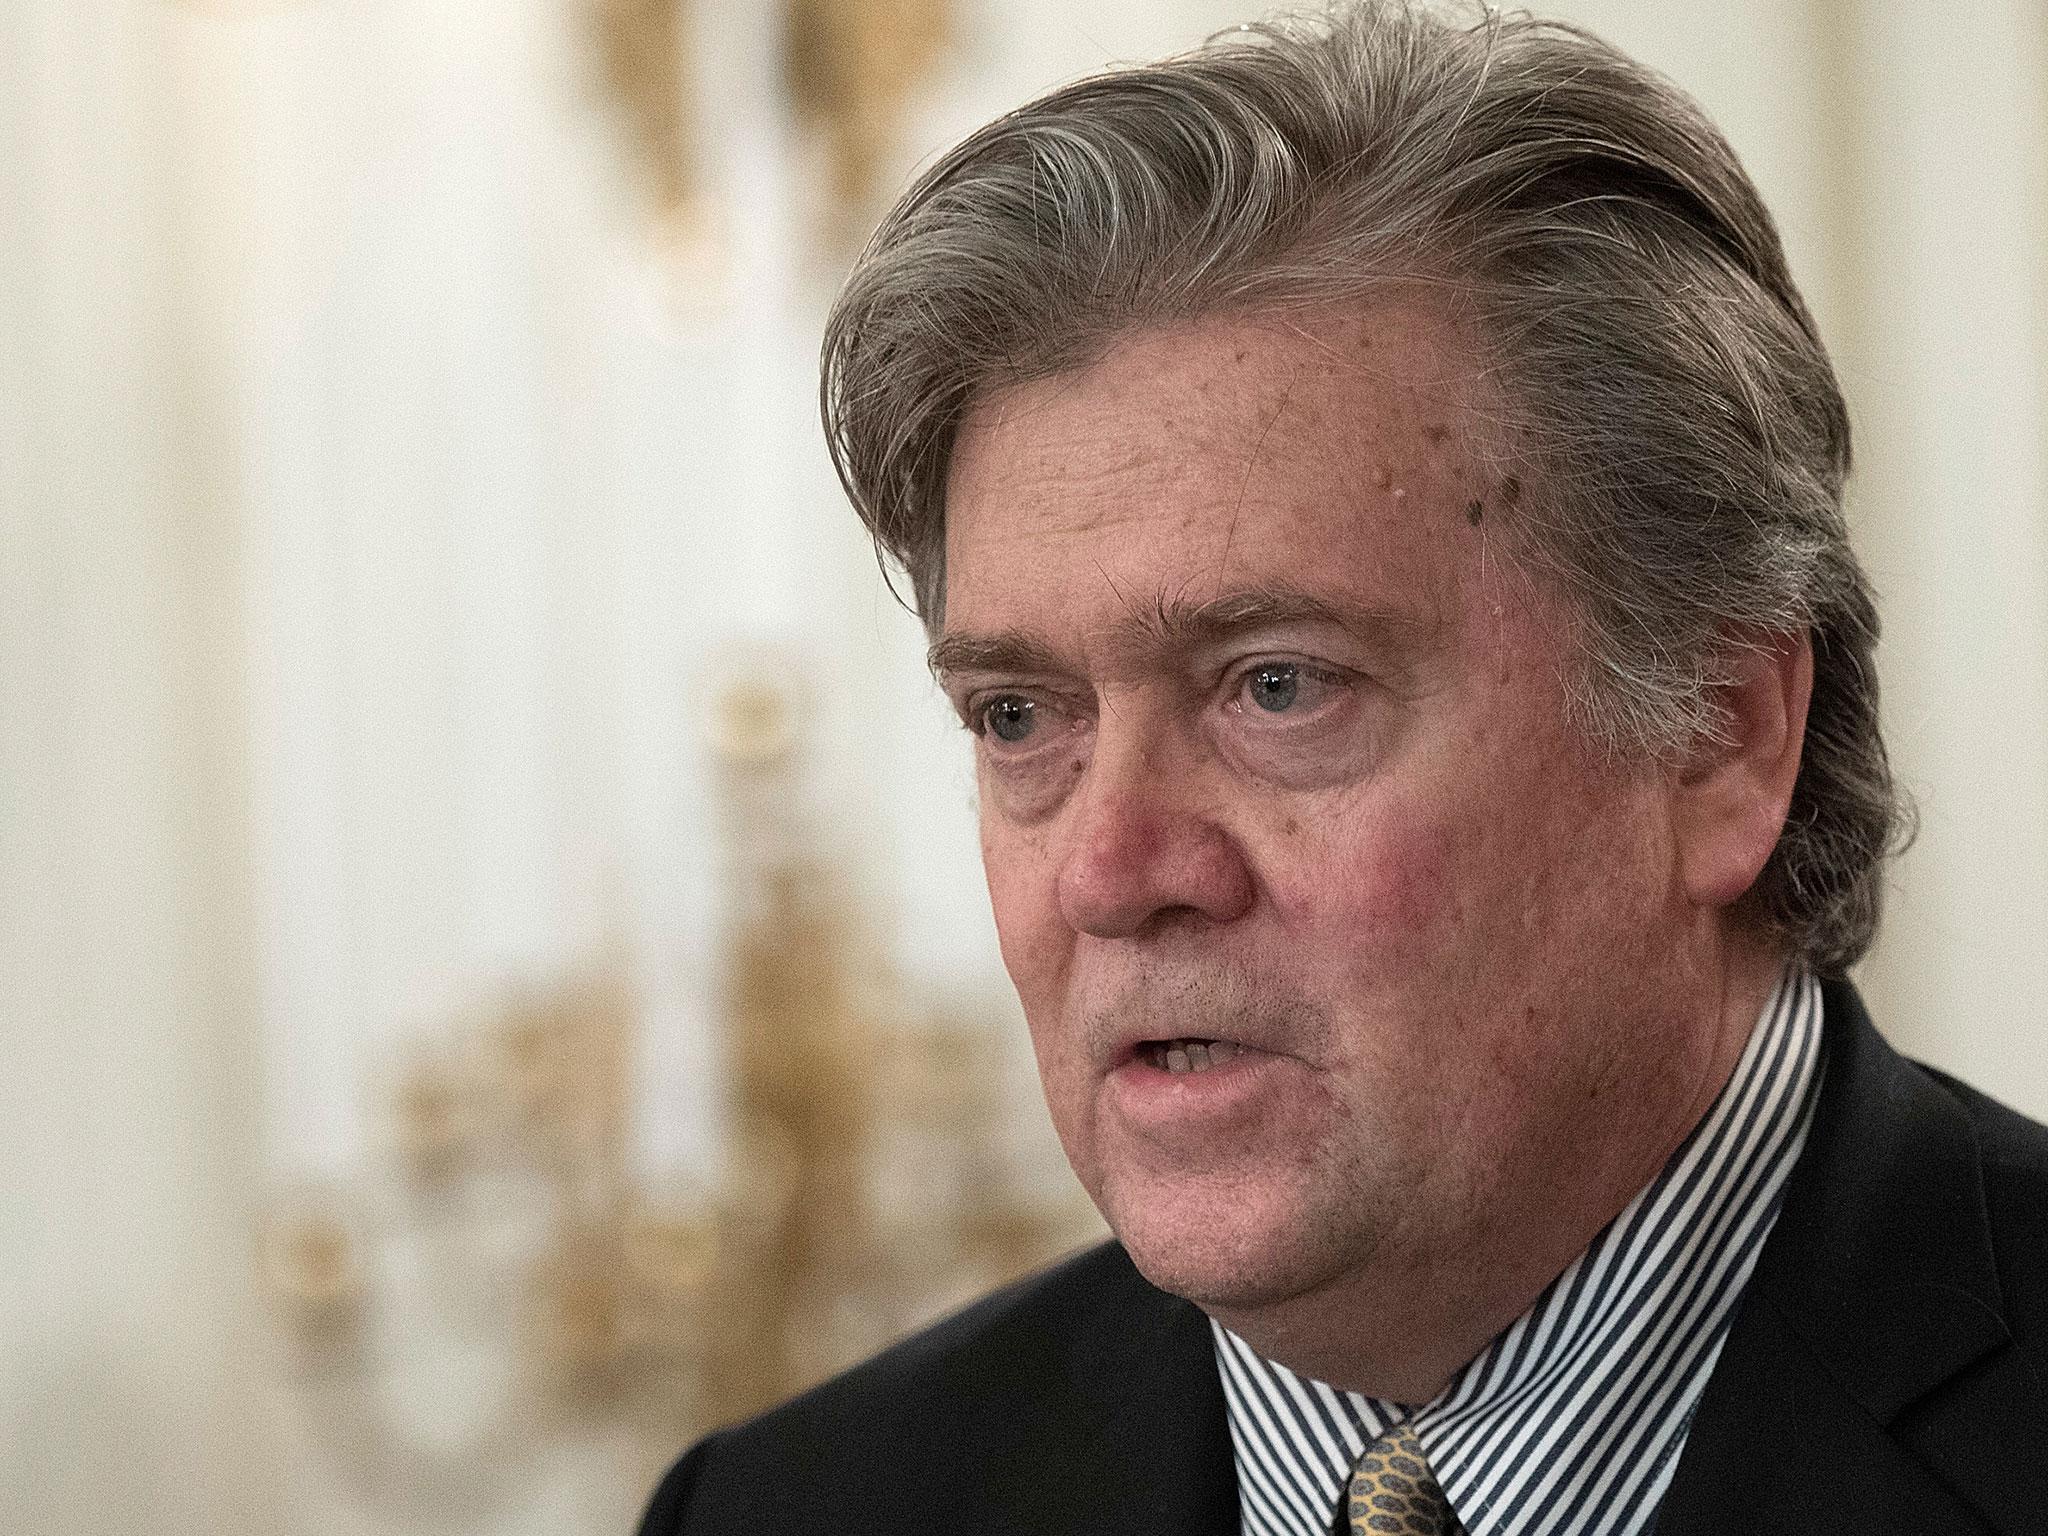 Breitbart has been implicated in a steady slew of controversies and has published a number of falsehoods and conspiracy theories, and deliberately misleading stories